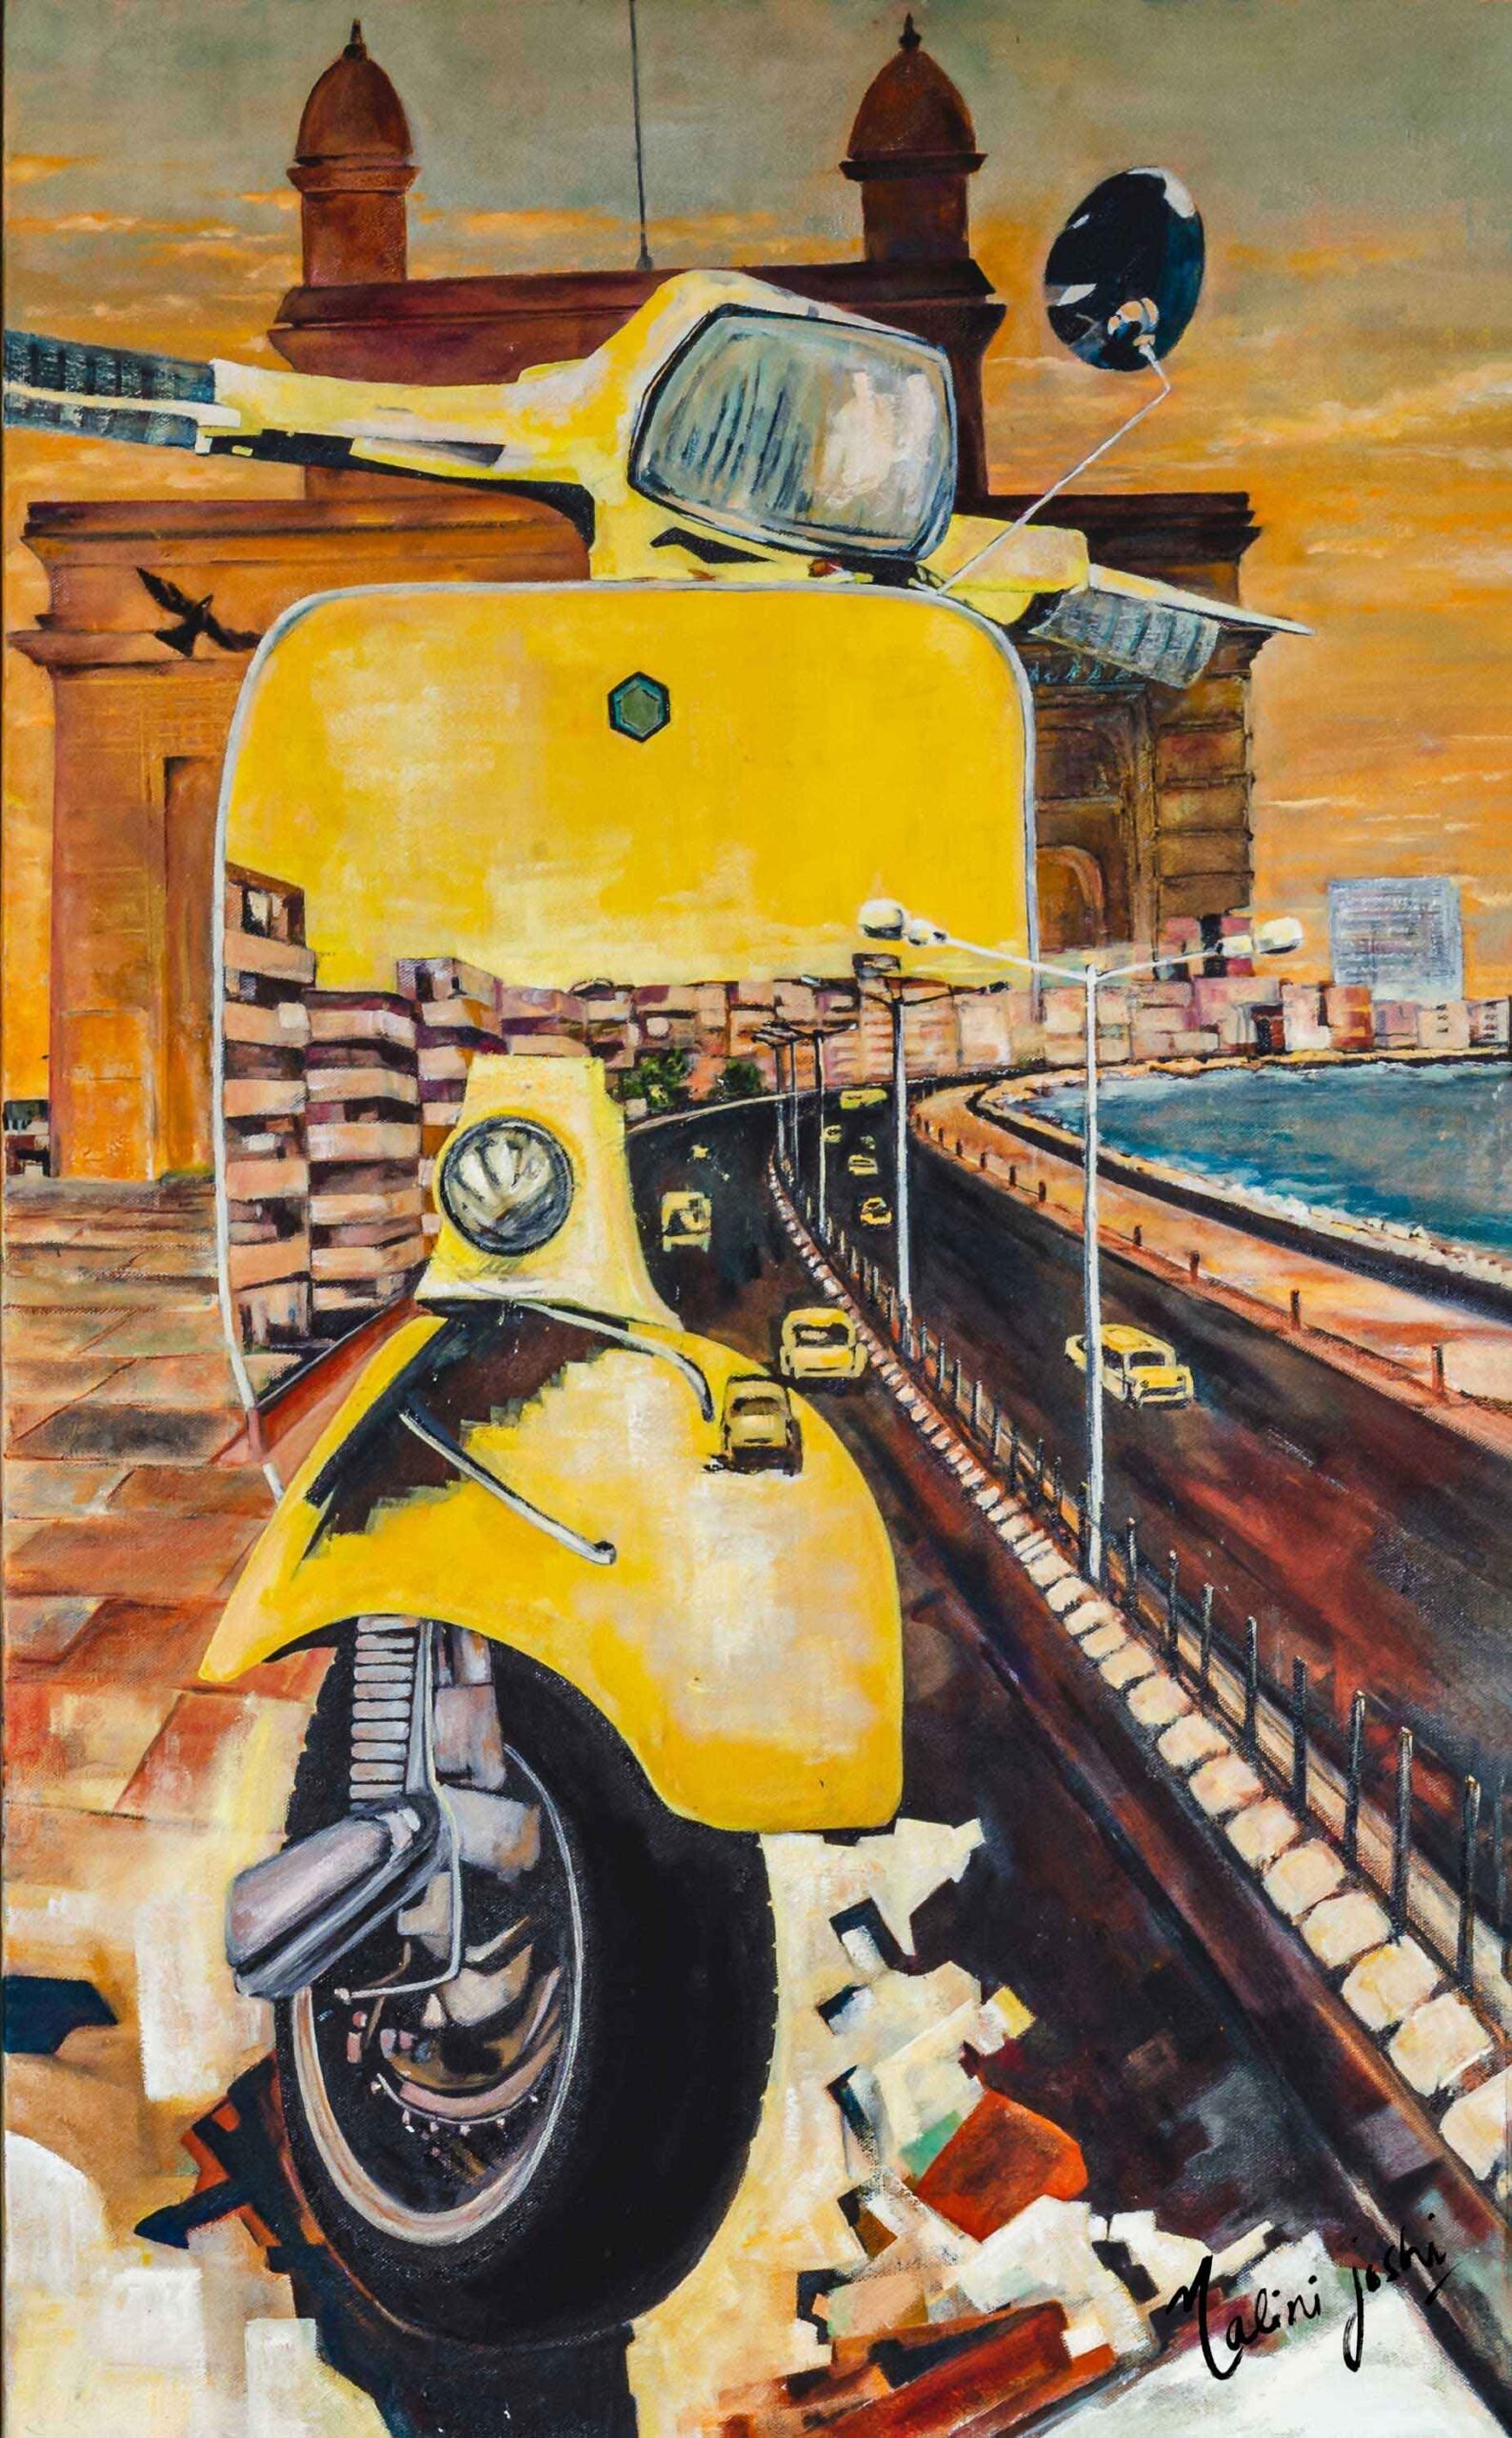 <em><strong>'Yesteryears- Vespa Series' </strong></em> <br/><br/> 22x36 inches <br/>Mixed Media and Oil on Canvas<br/> MMC2108